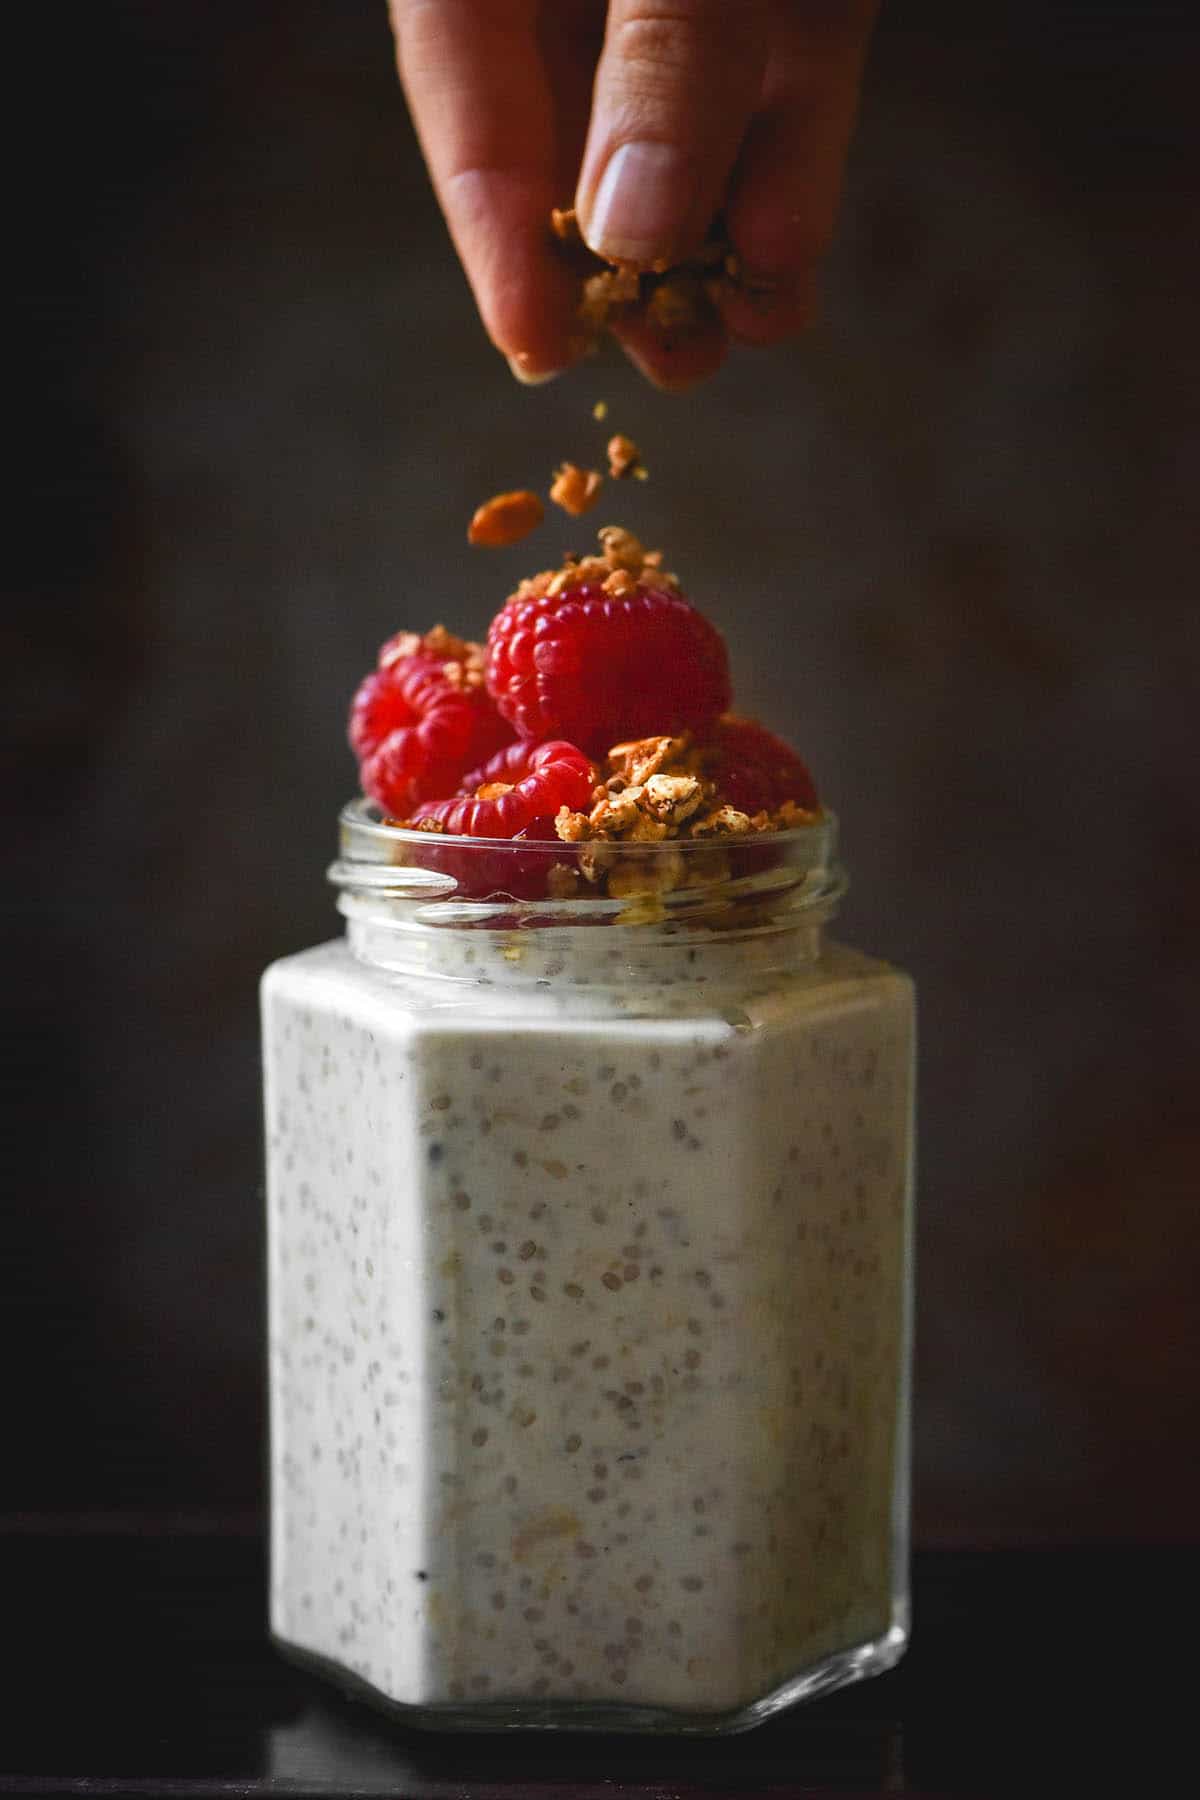 A side on moody image of a jar of low FODMAP overnight oats topped with raspberries and granola. A hand extends down from the top of the image to sprinkle extra granola atop the raspberries 